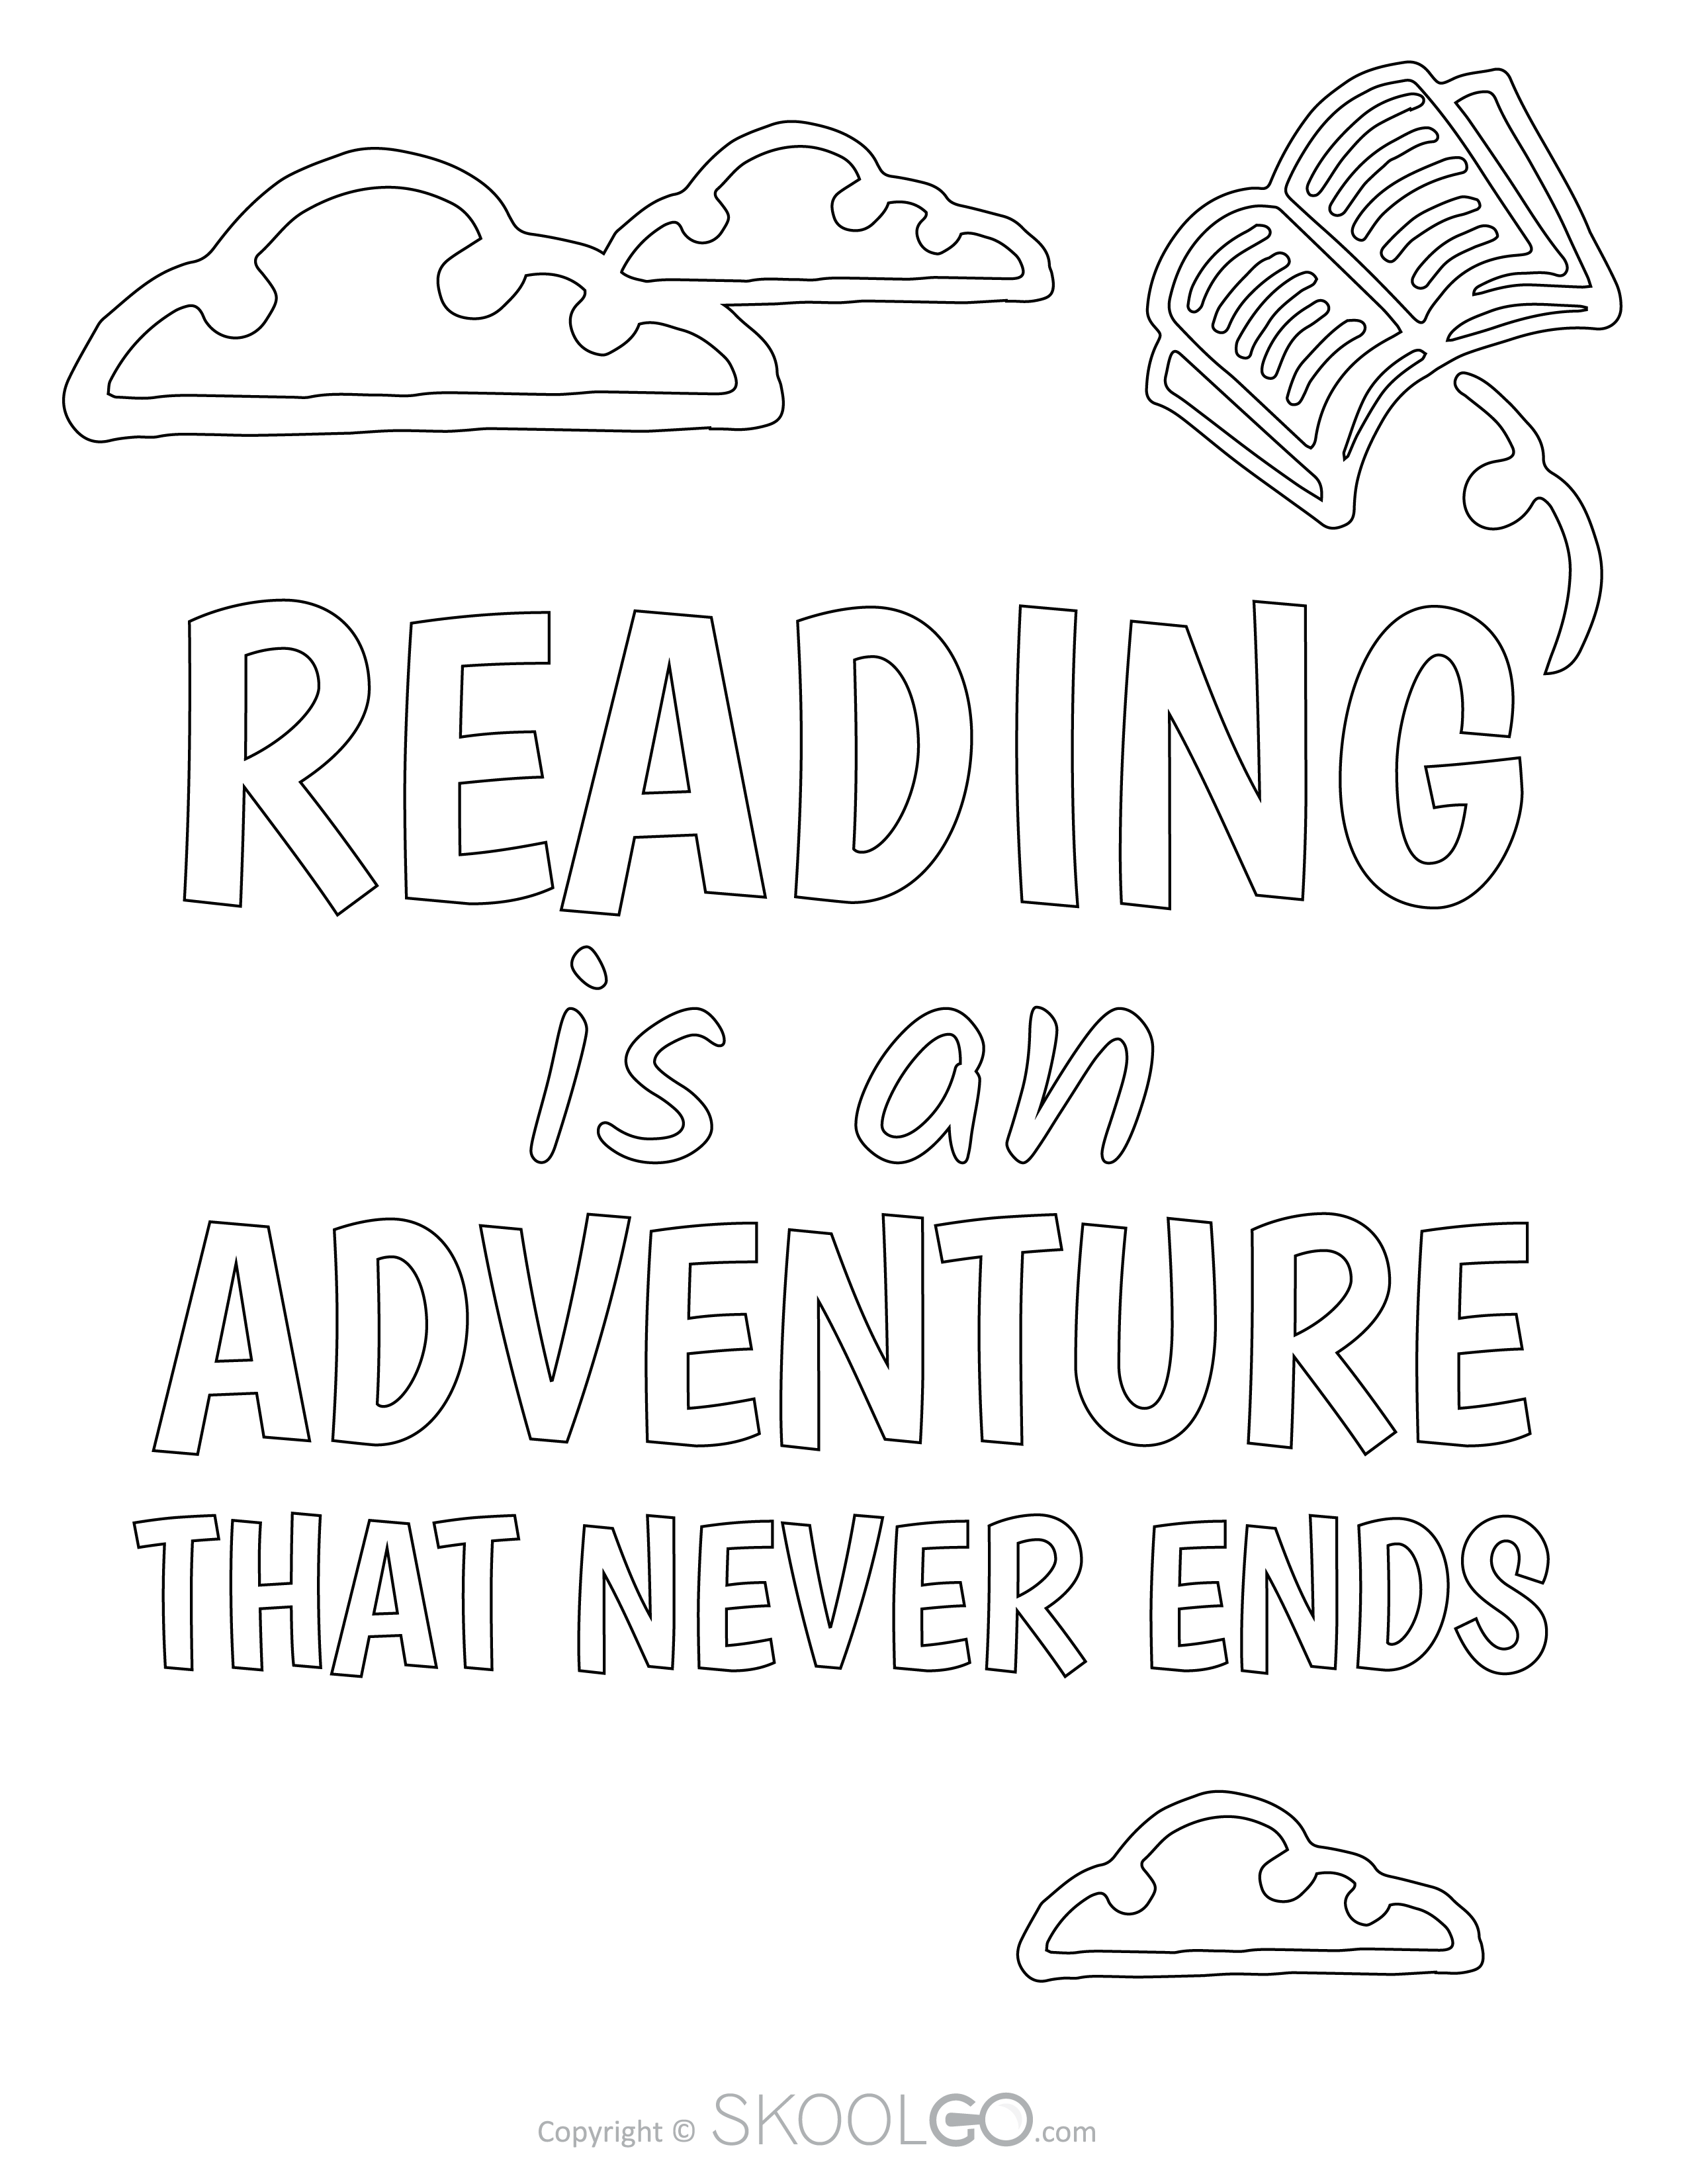 Reading is an Adventure That Never Ends - Free Coloring Version Poster